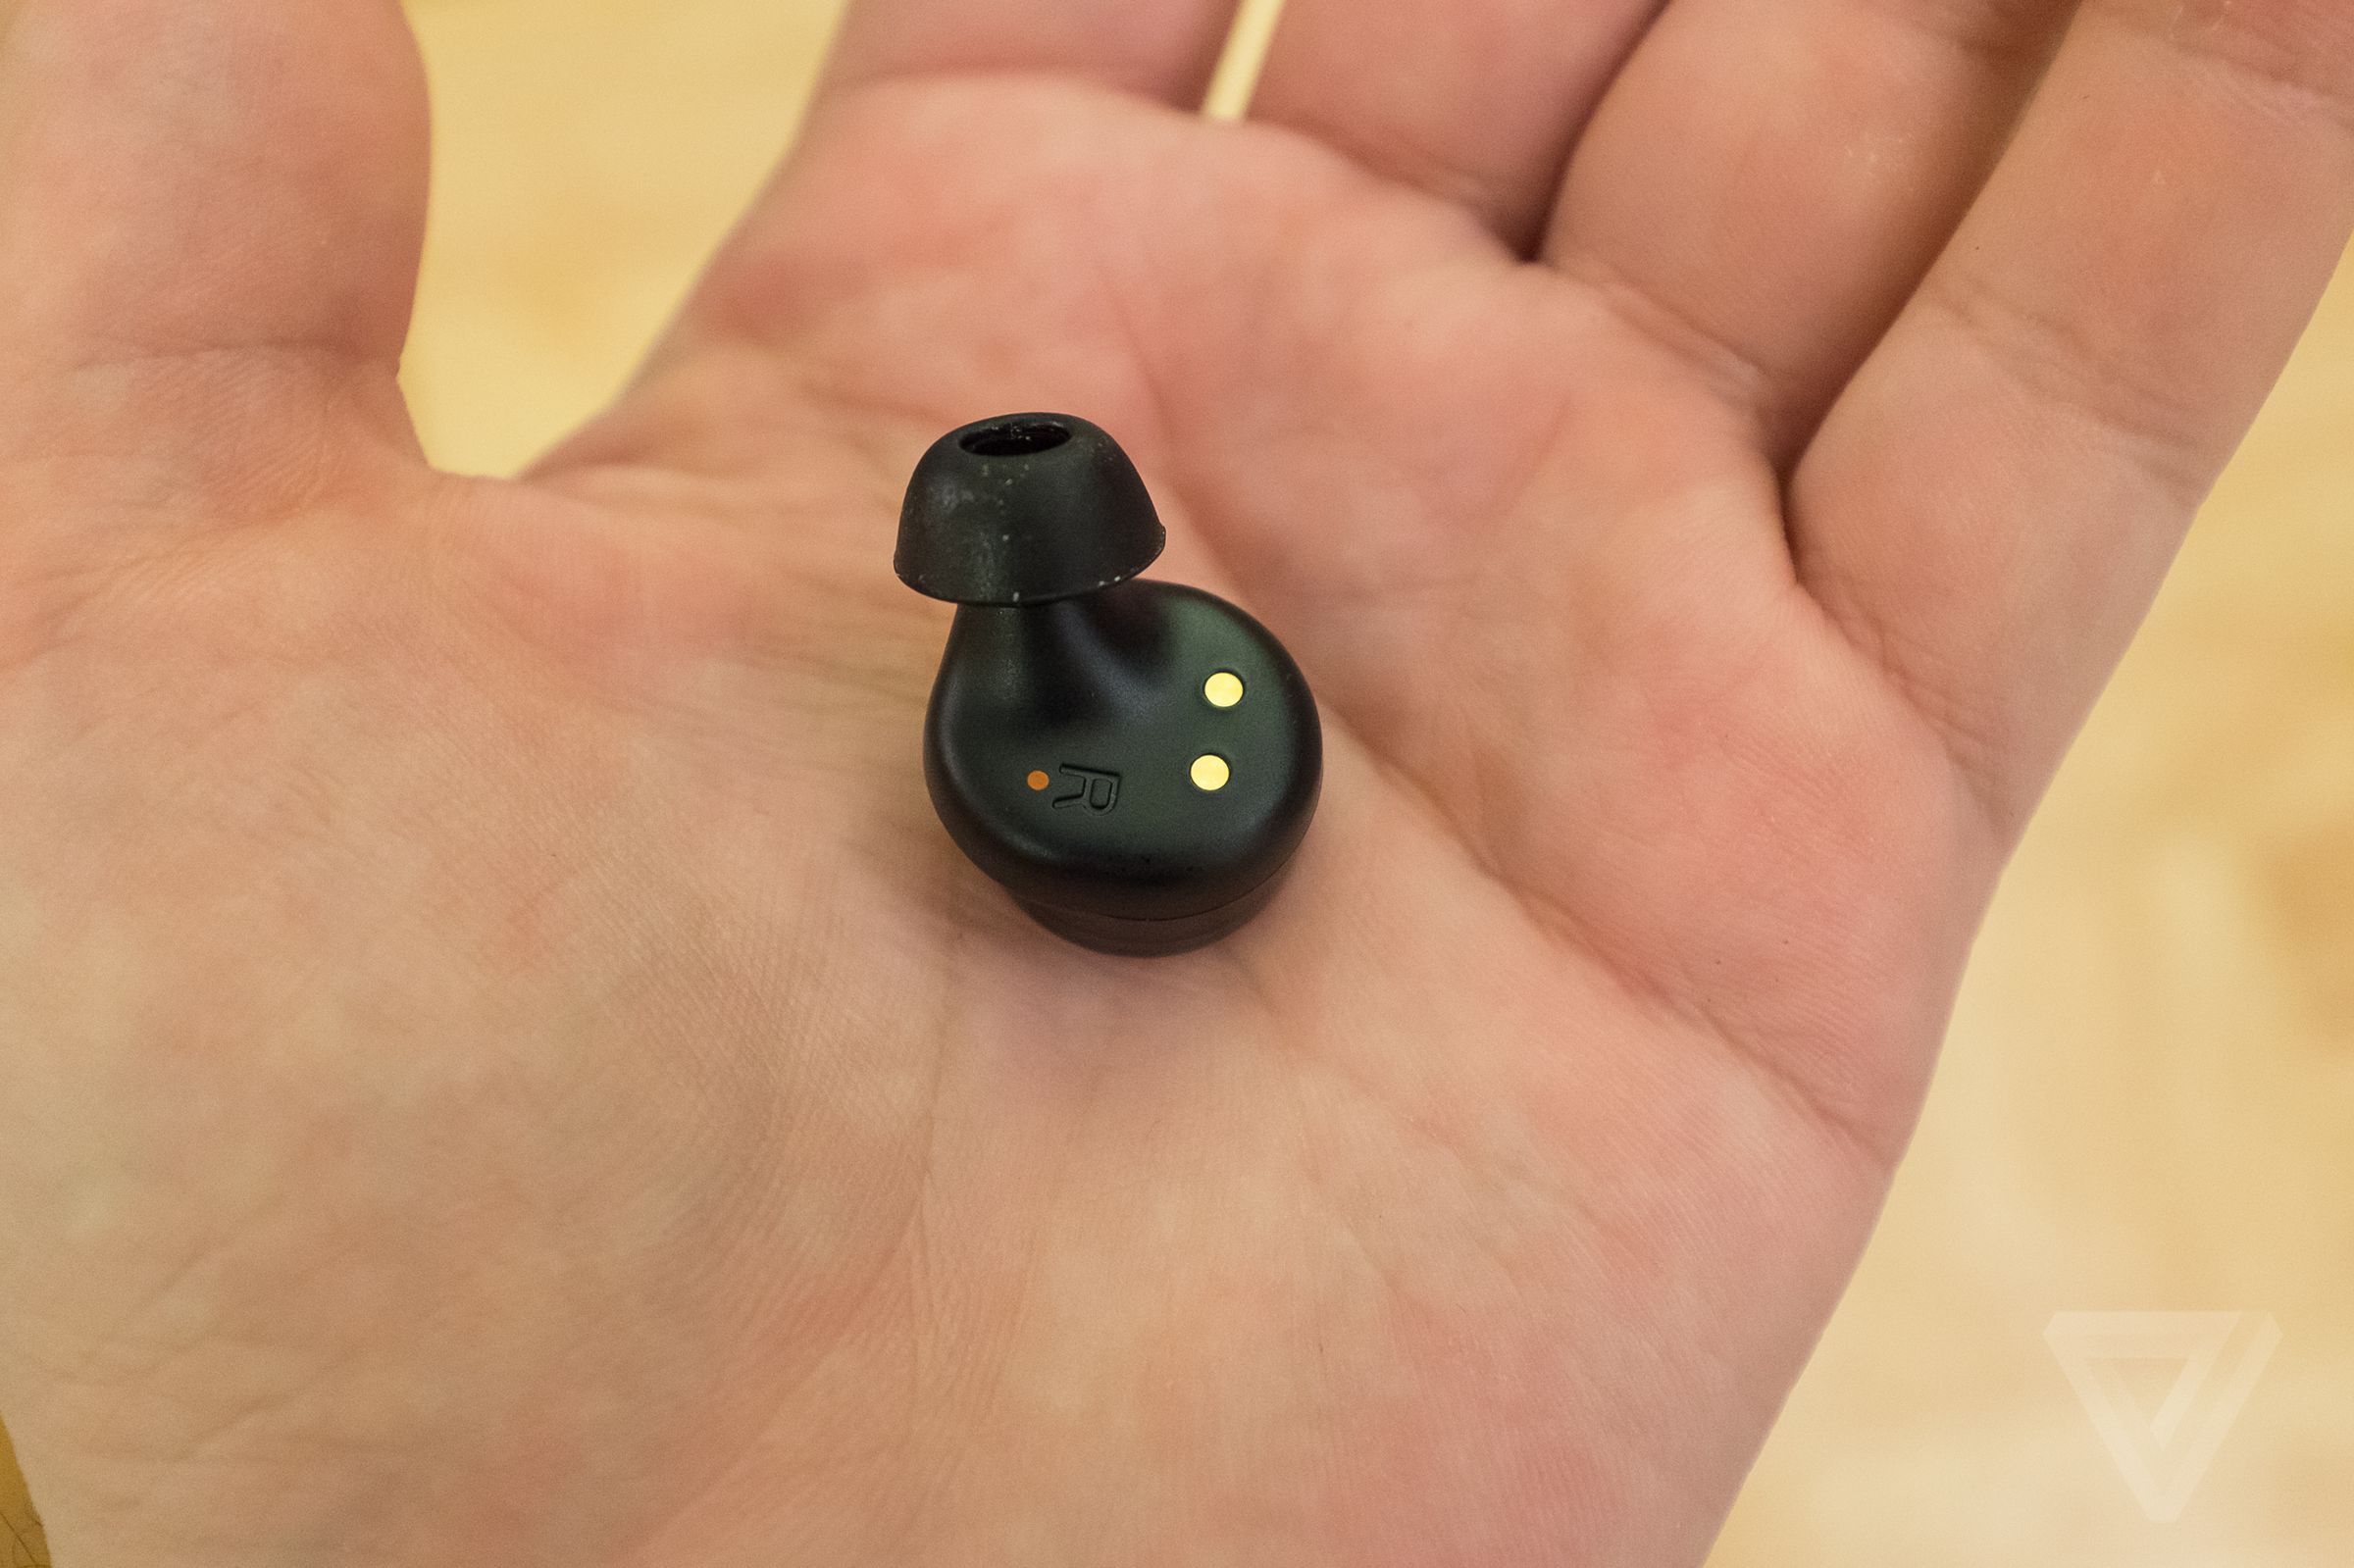 Here active listening earbuds in photos